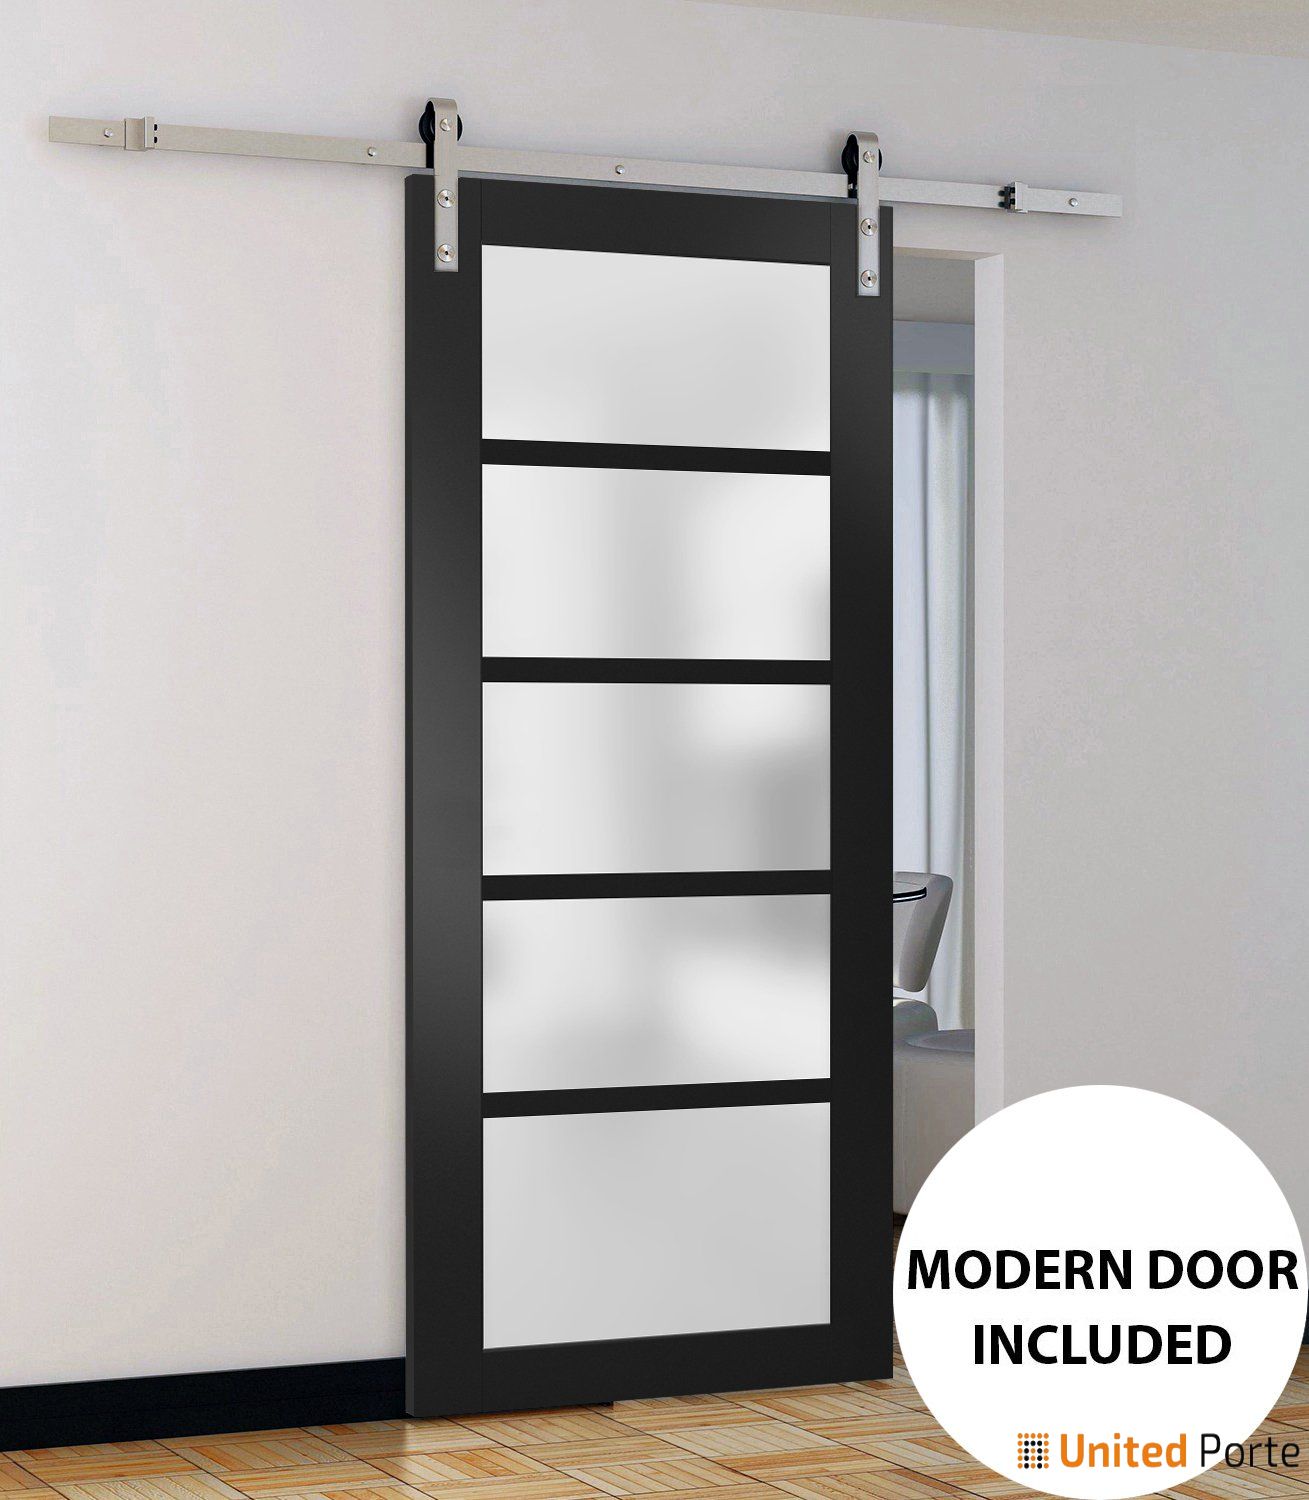 Quadro 4002 Matte Black Barn Door with Frosted Glass and Stainless Rail